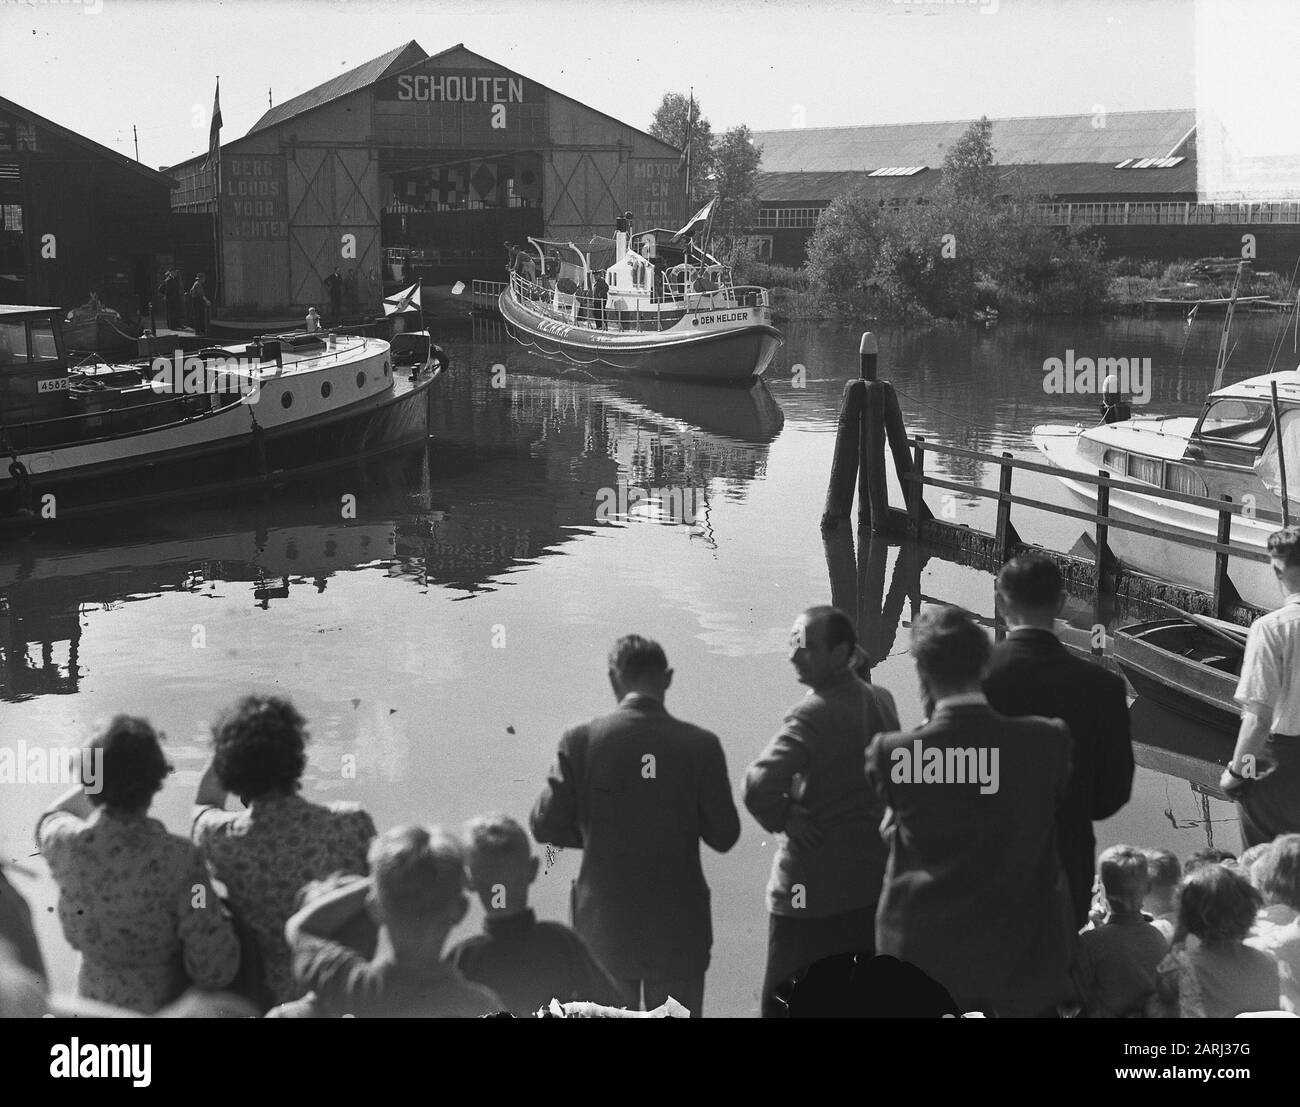 Launching of new lifeboat, the mrb Prins Hendrik for NZHRM at shipyard Schouten in Muiden. Date: 11 June 1951 Location: Muiden Keywords: lifeboats Institution name: KNZHRM Stock Photo